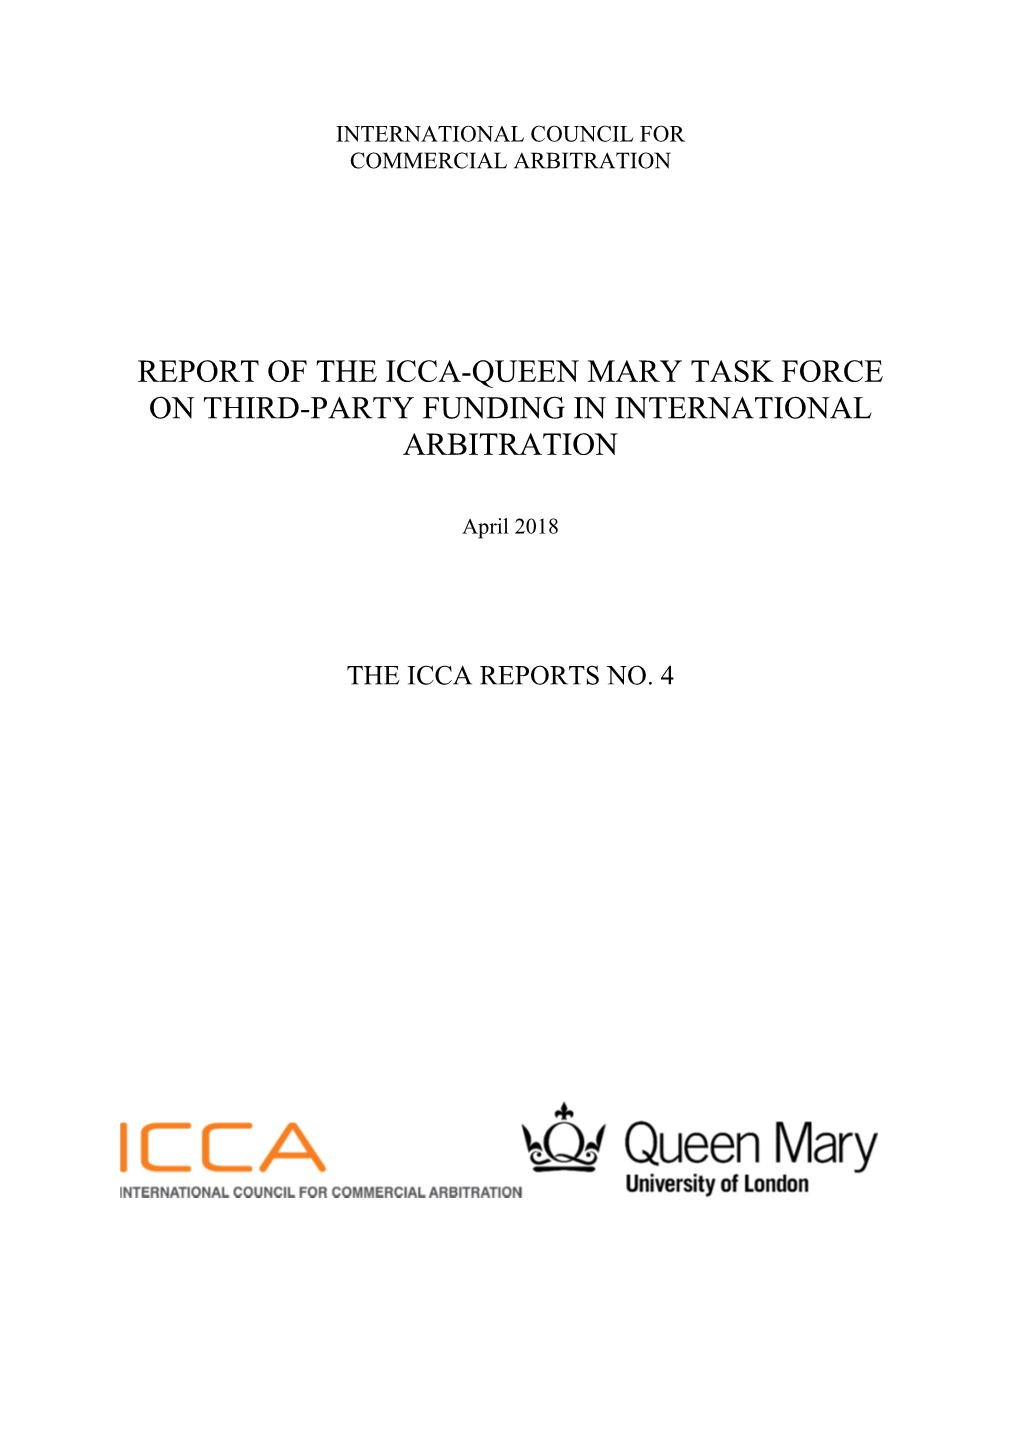 Report of the ICCA-Queen Mary Task Force on Third Party Funding